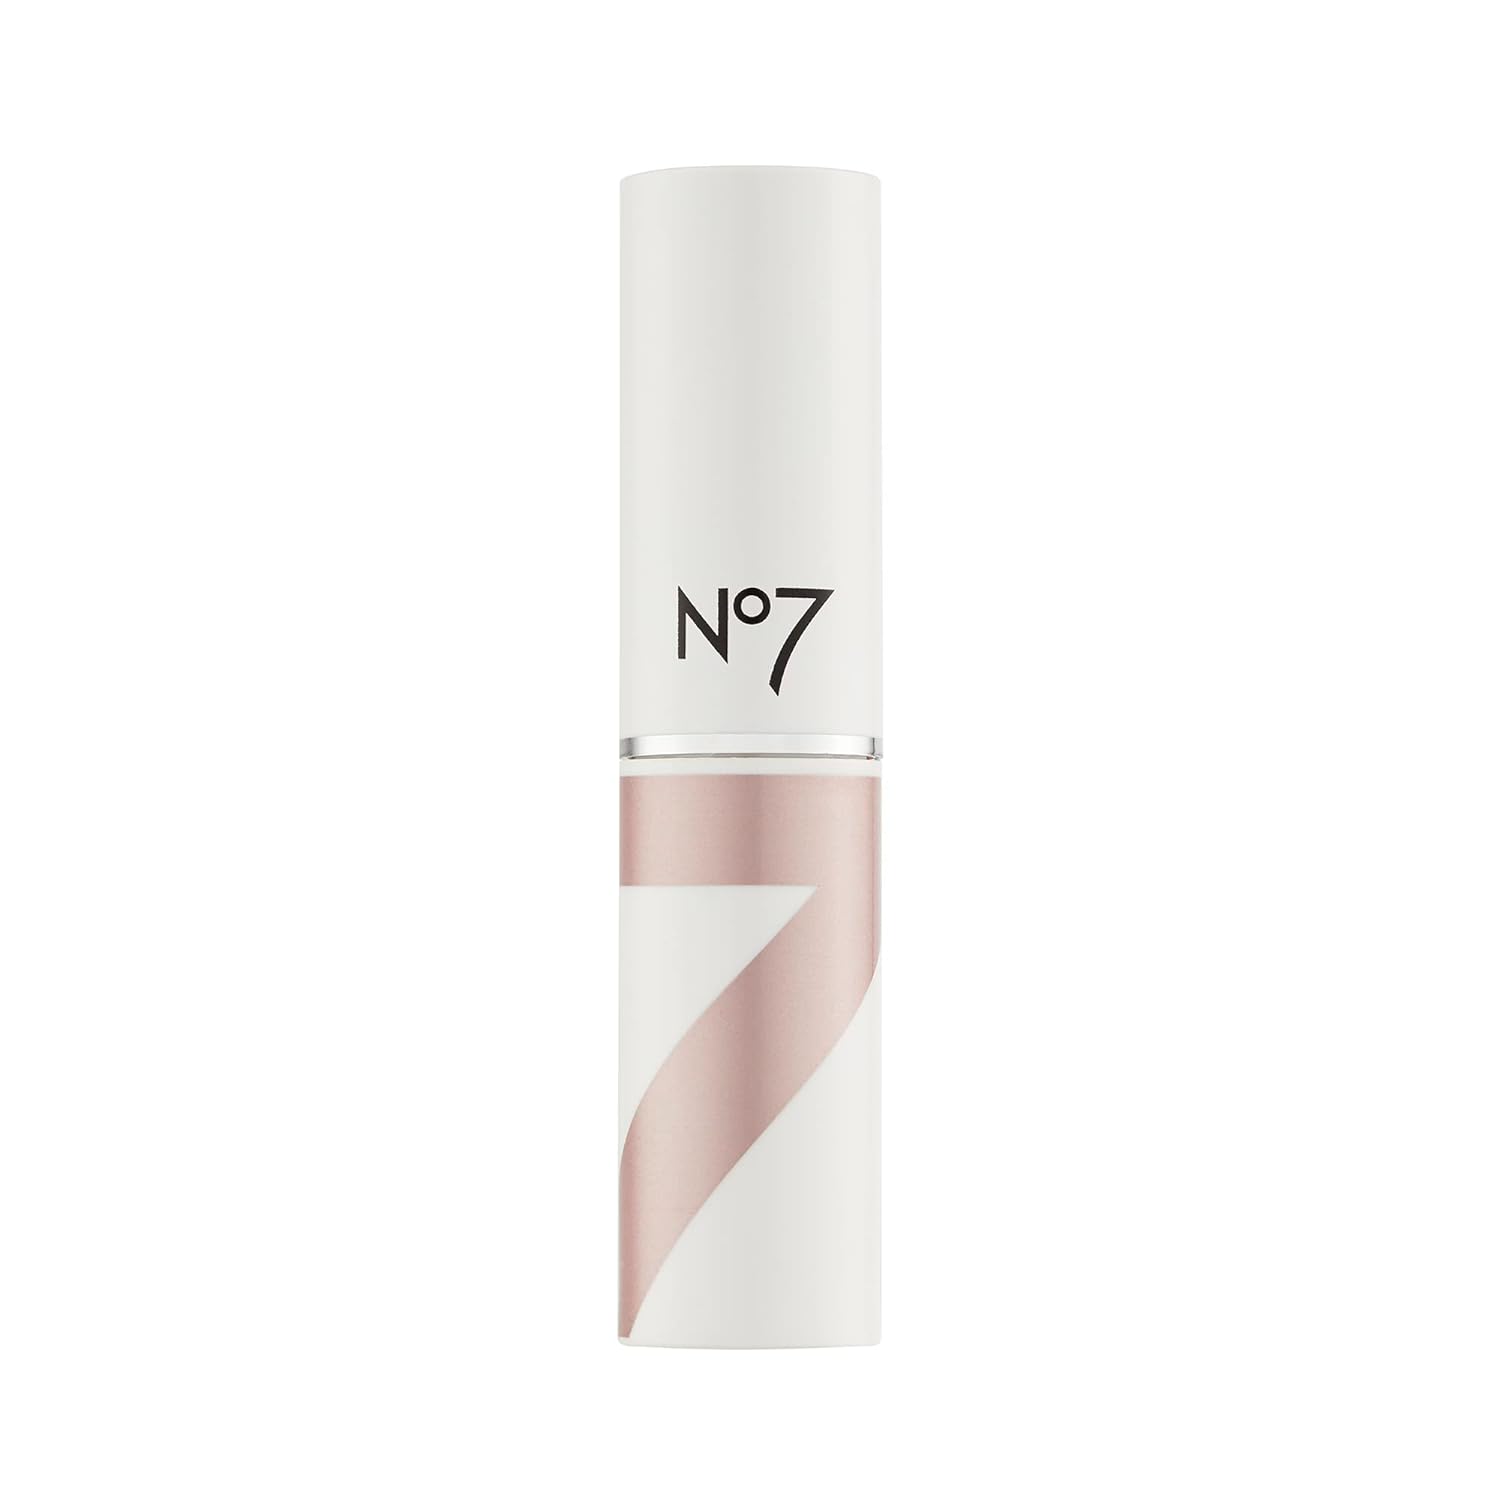 No7 Stay Perfect Stick Foundation - Medium Coverage Long Wear Cream Foundation for All Skin Types - Contains Squalene for Hydrating Foundation Makeup - Deeply Honey, (10g)